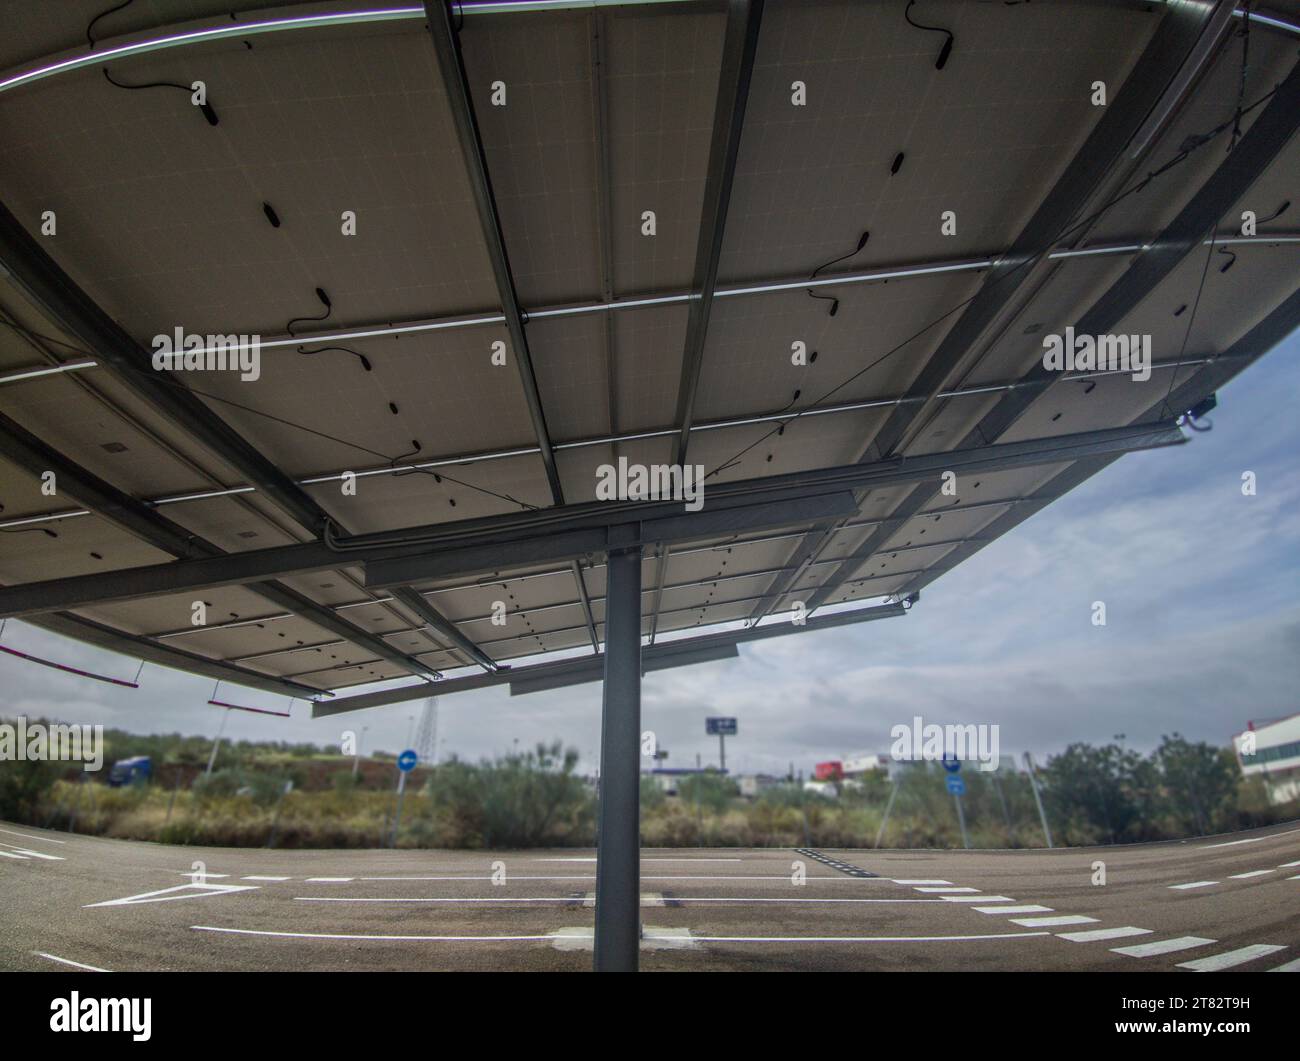 Solar canopy installation over parking. Wide angle lens view Stock Photo